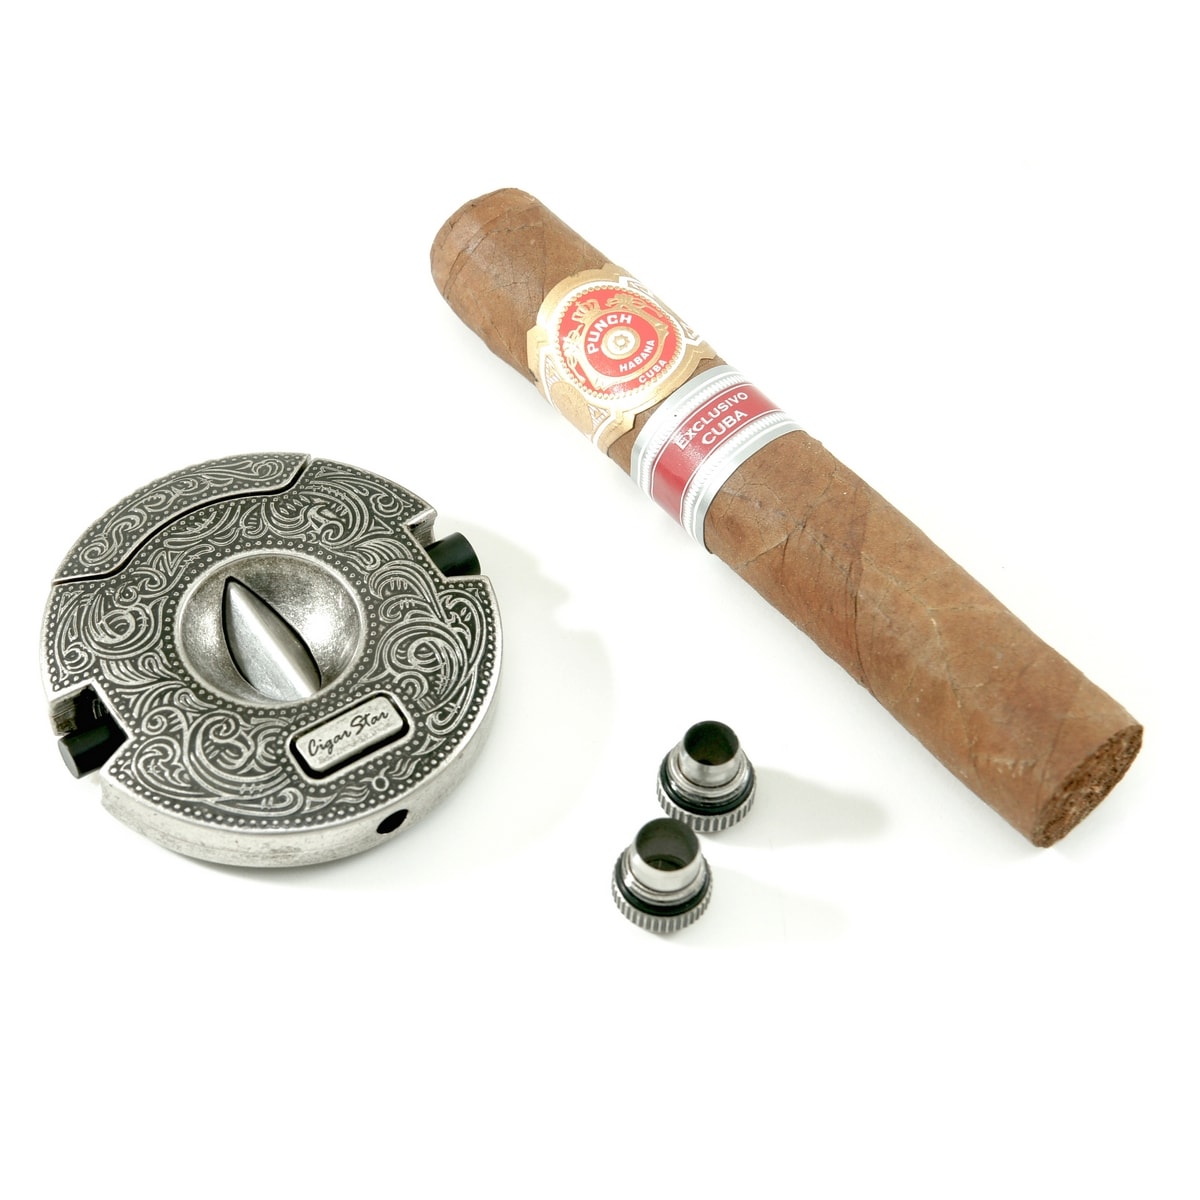 Revo Spring Loaded V Cigar Cutter with dual built in cigar punches